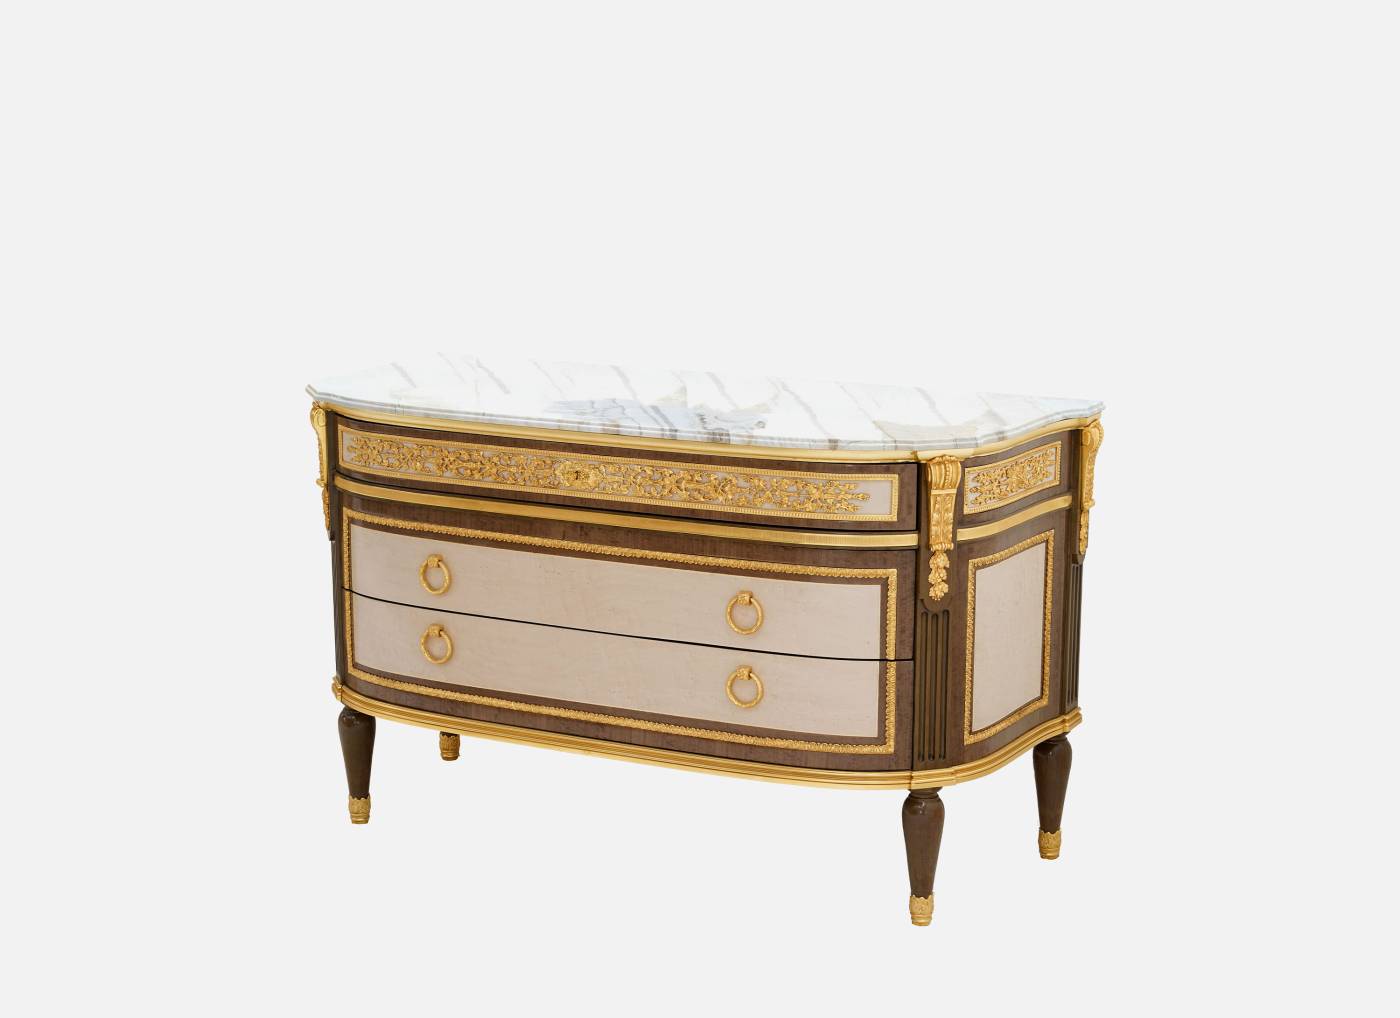 ART. 796-2 – The elegance of luxury classic Chest of drawers made in Italy by C.G. Capelletti.